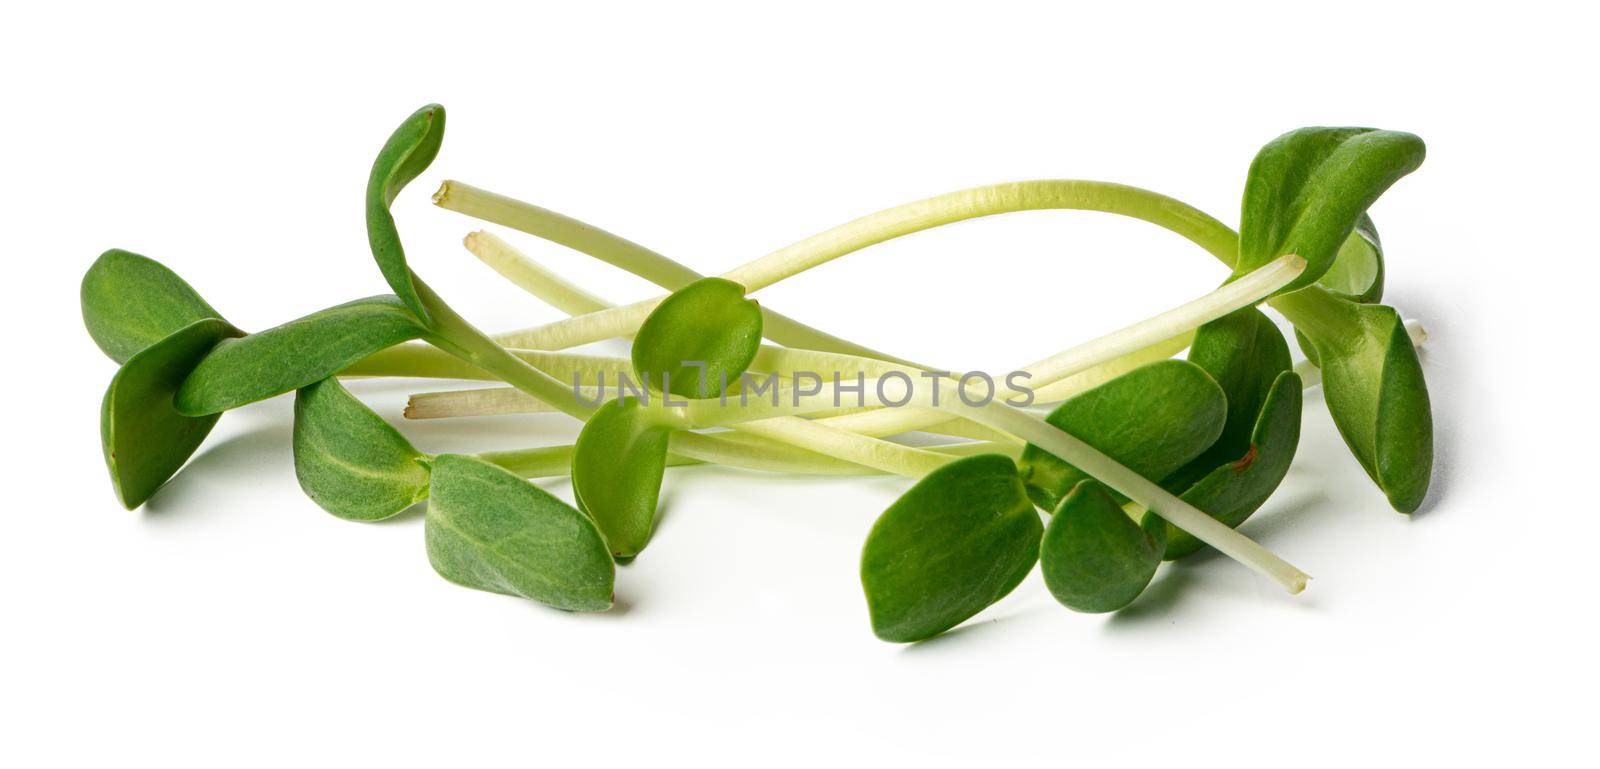 Bunch of micro green sprouts isolated on white background. close up.